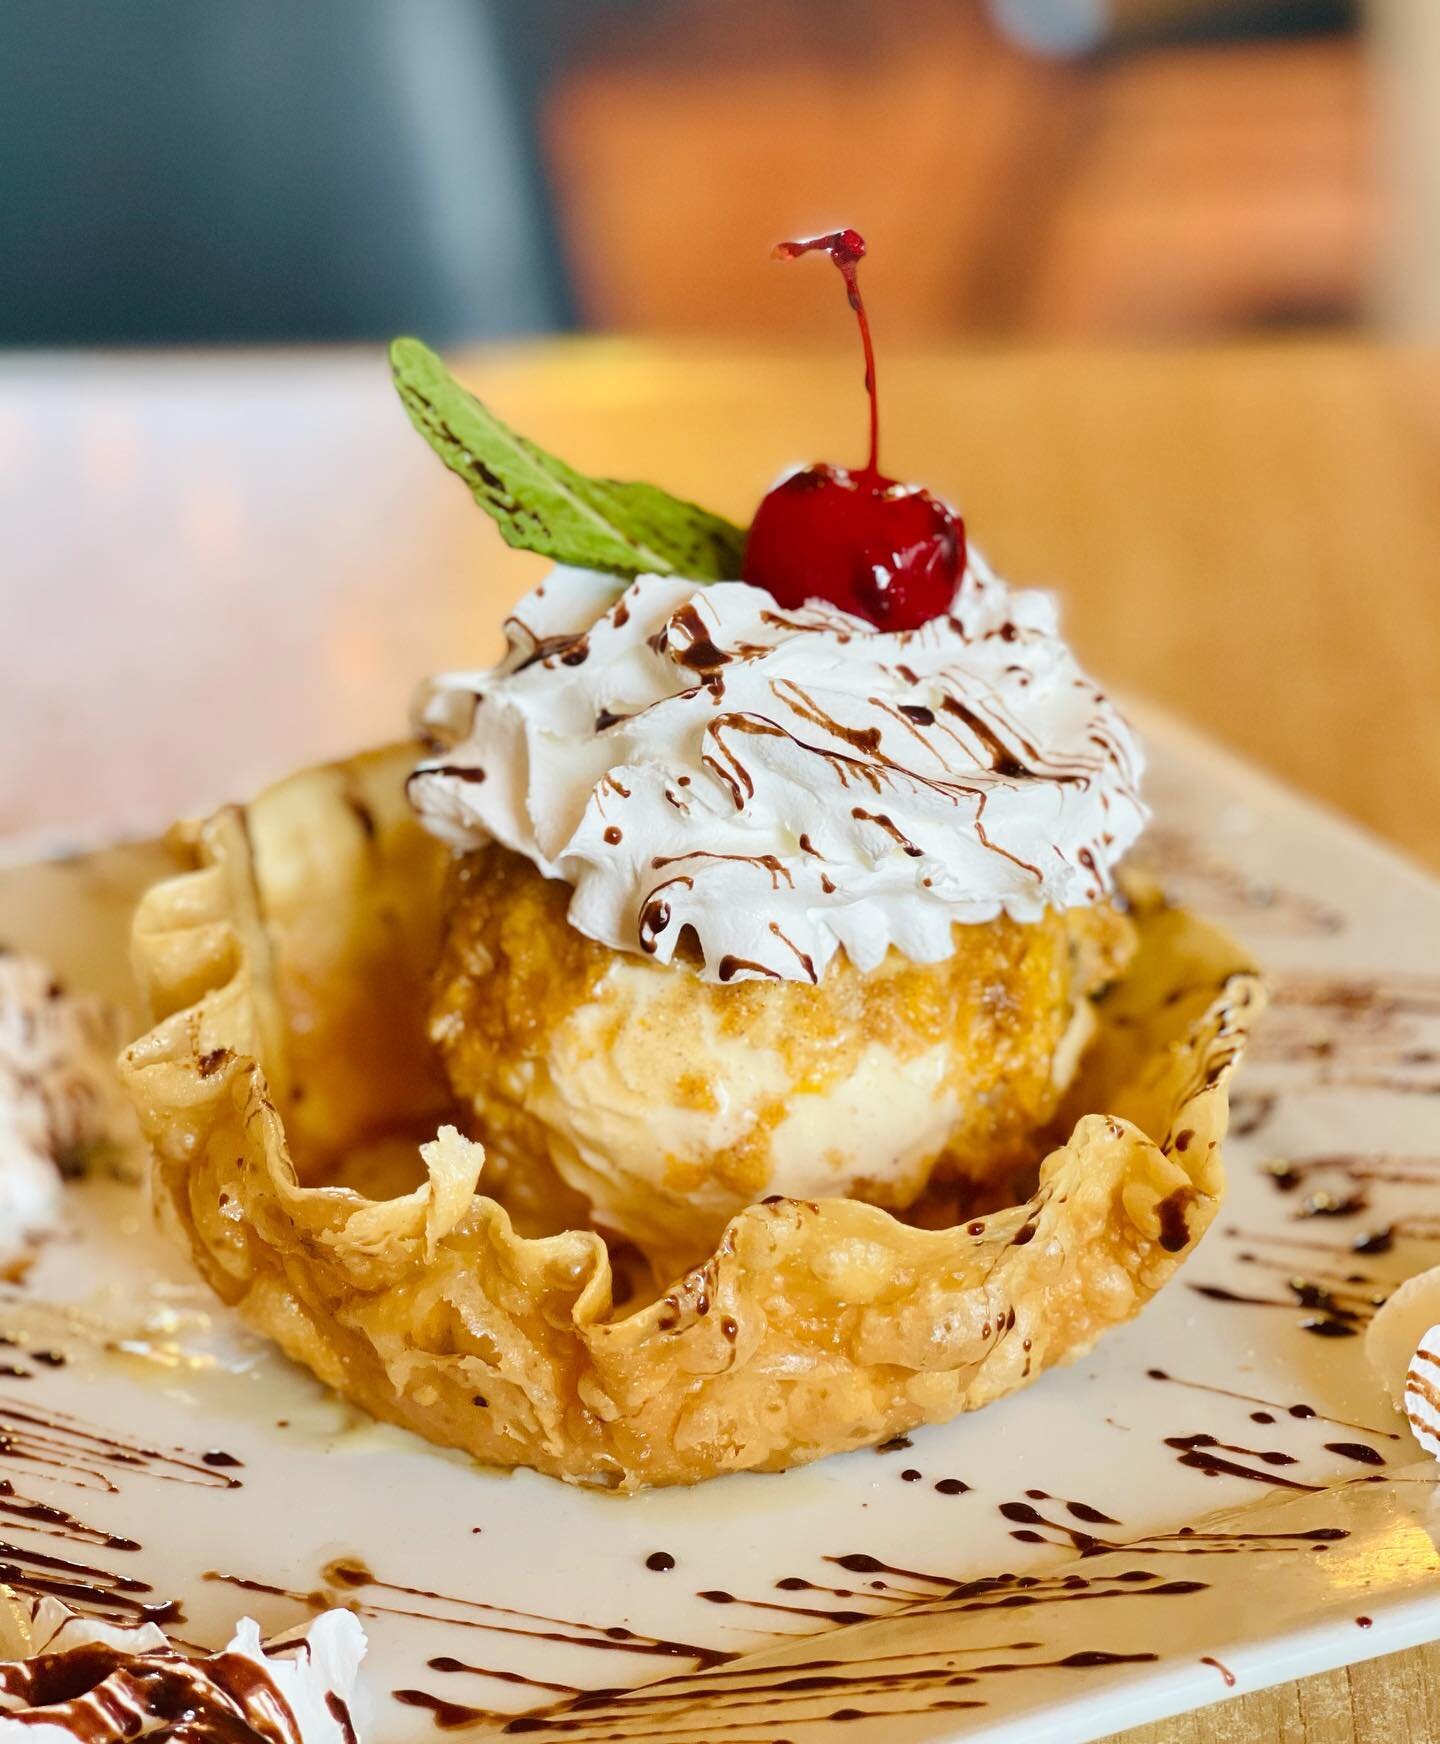 Save room for desert!! Our fried ice cream is a must try!
We are open for Dine-in and Takeout!
Call us at (520)748-1032!